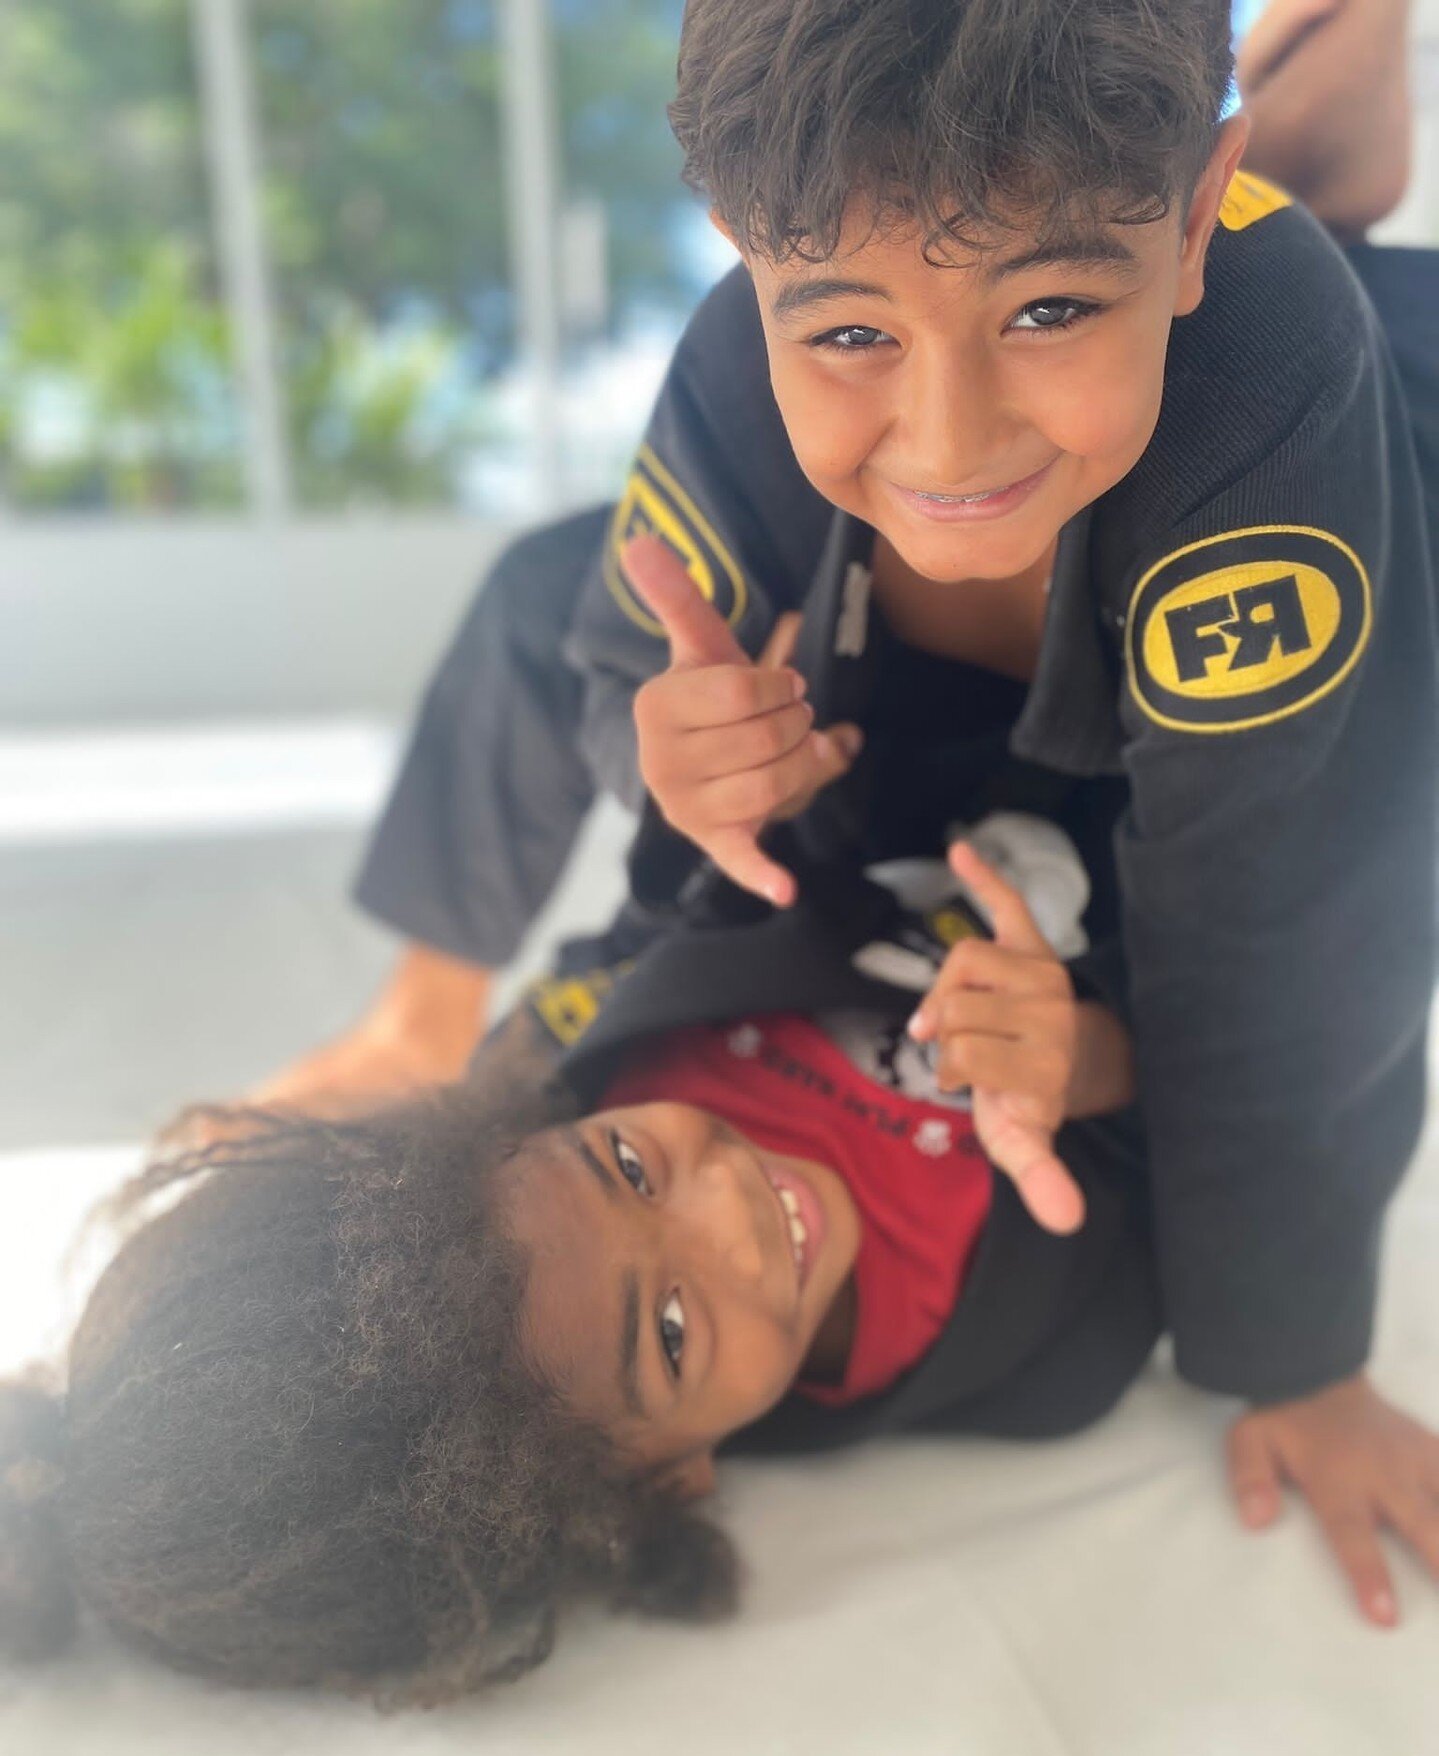 Let's get that work in Familia 🤙⁠
⁠
As school is starting to let out for the holidays, keep your child productive during winter break at FRBJJ! Our Martial Arts for Kids classes are perfect for⁠ getting the kiddos out of the house and getting active